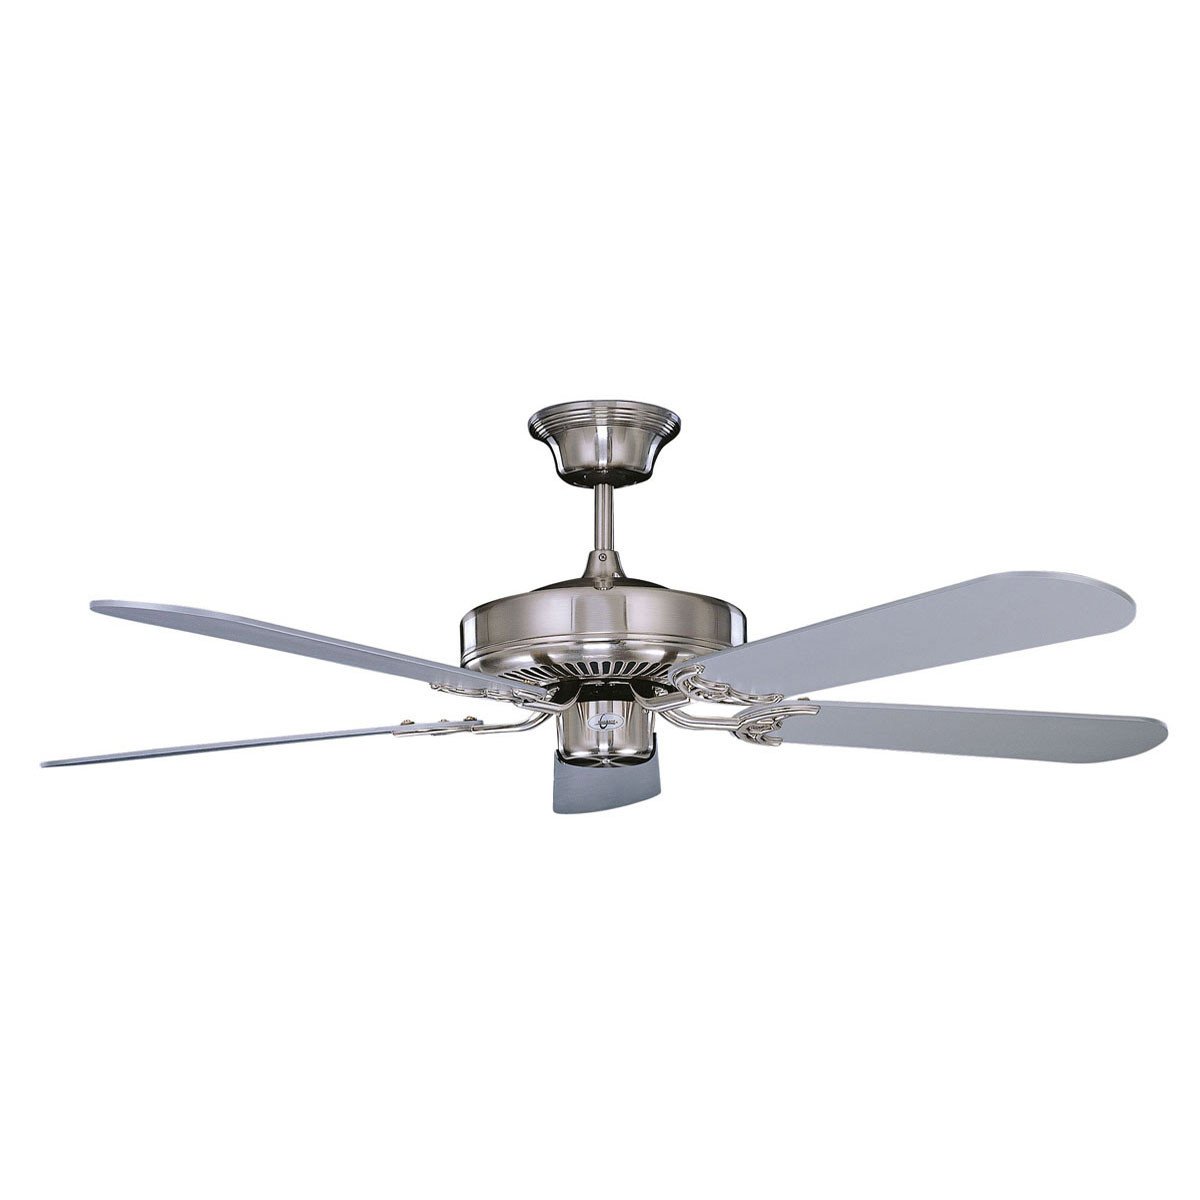 Concord Fans Decorama Energy Saver Modern 52" Stainless Steel Ceiling Fan